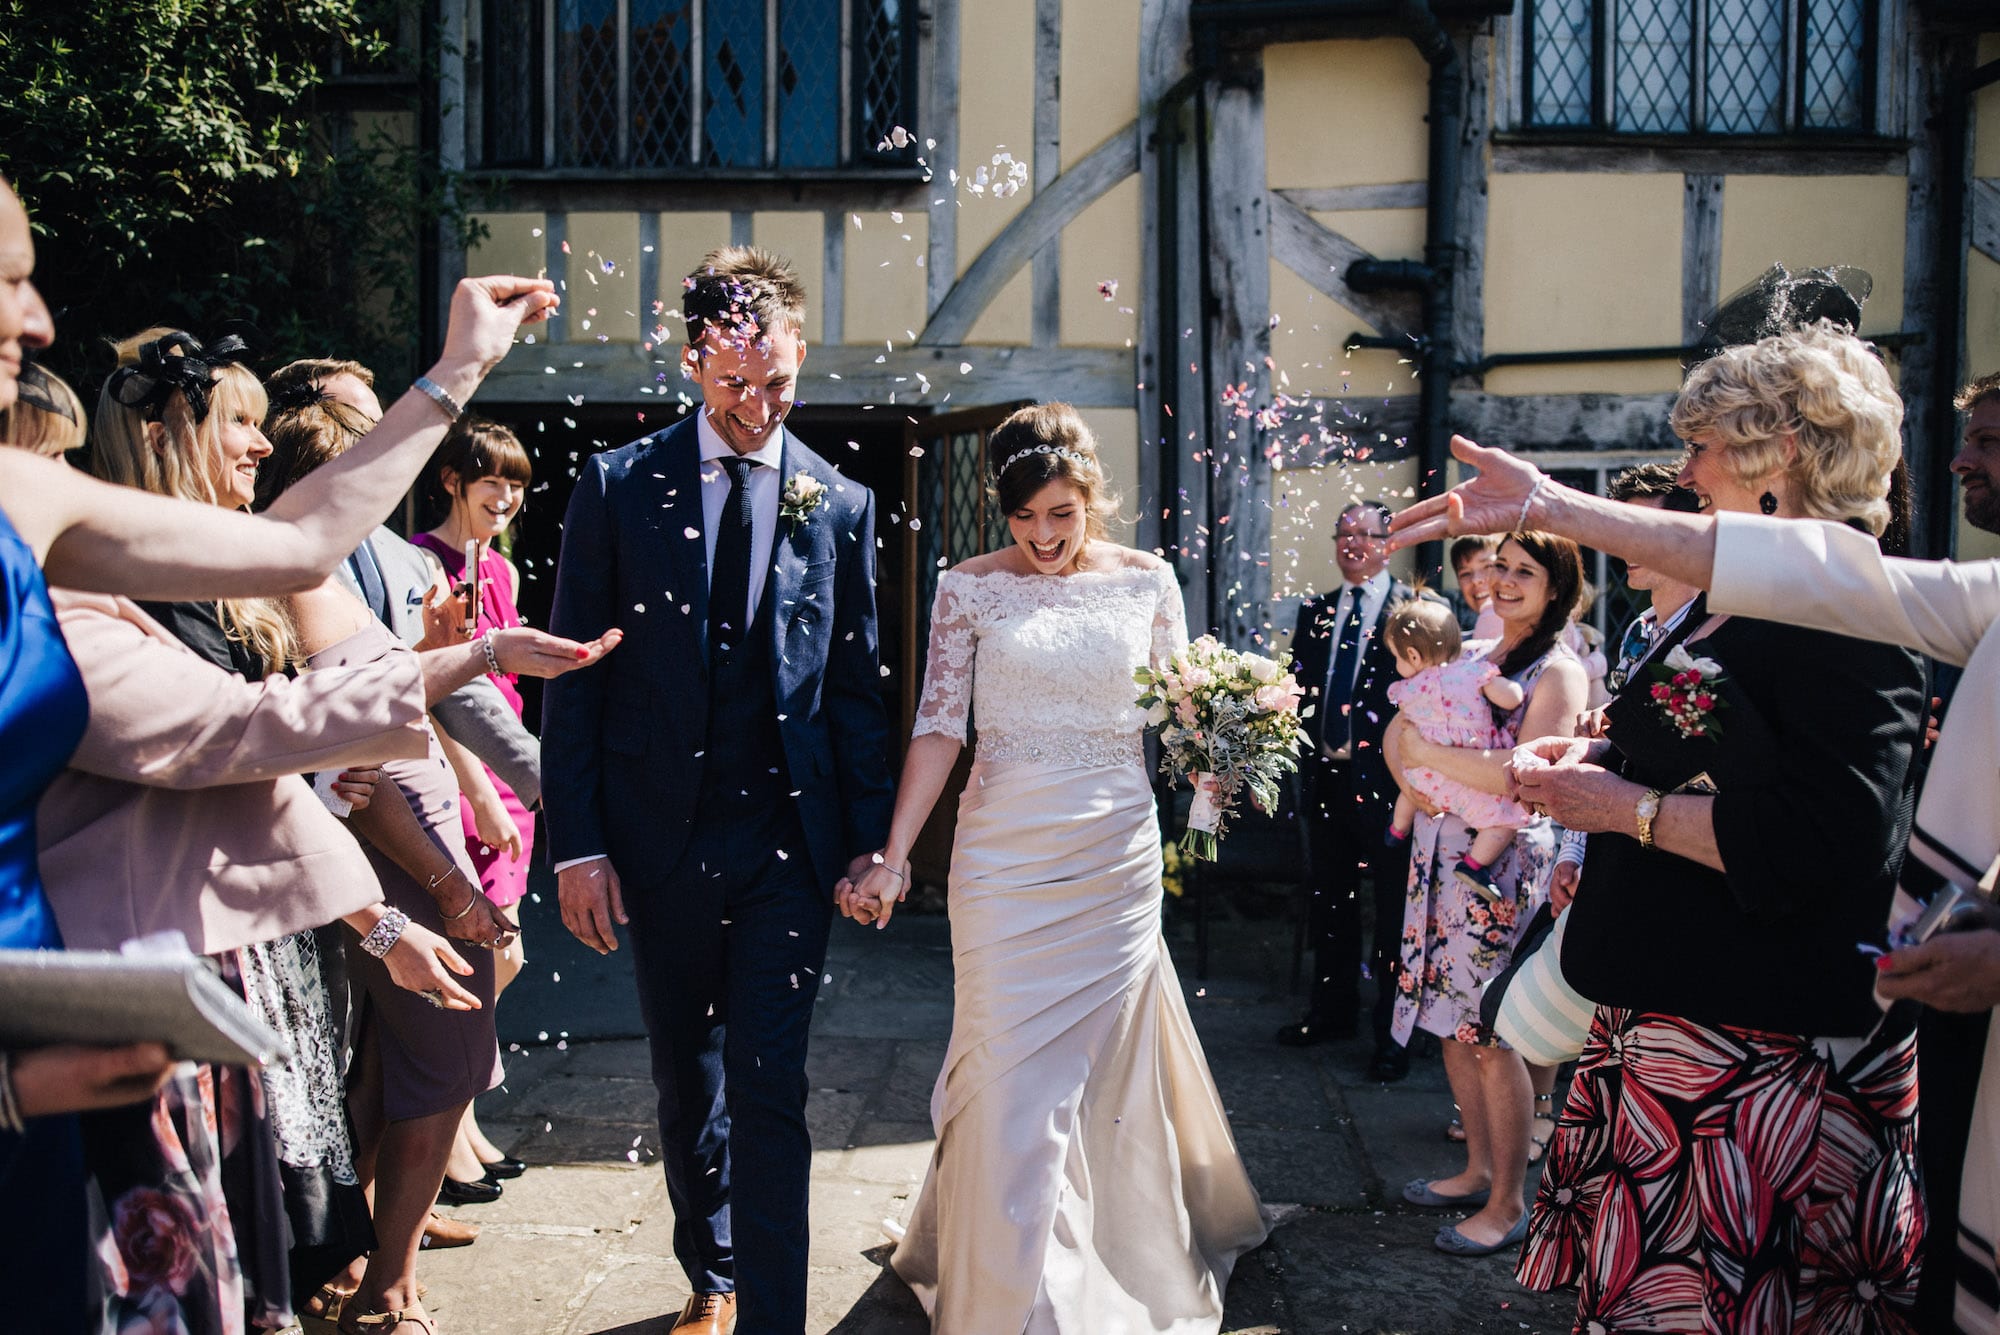 Spring confetti shot of Bride and Groom exiting rustic barn